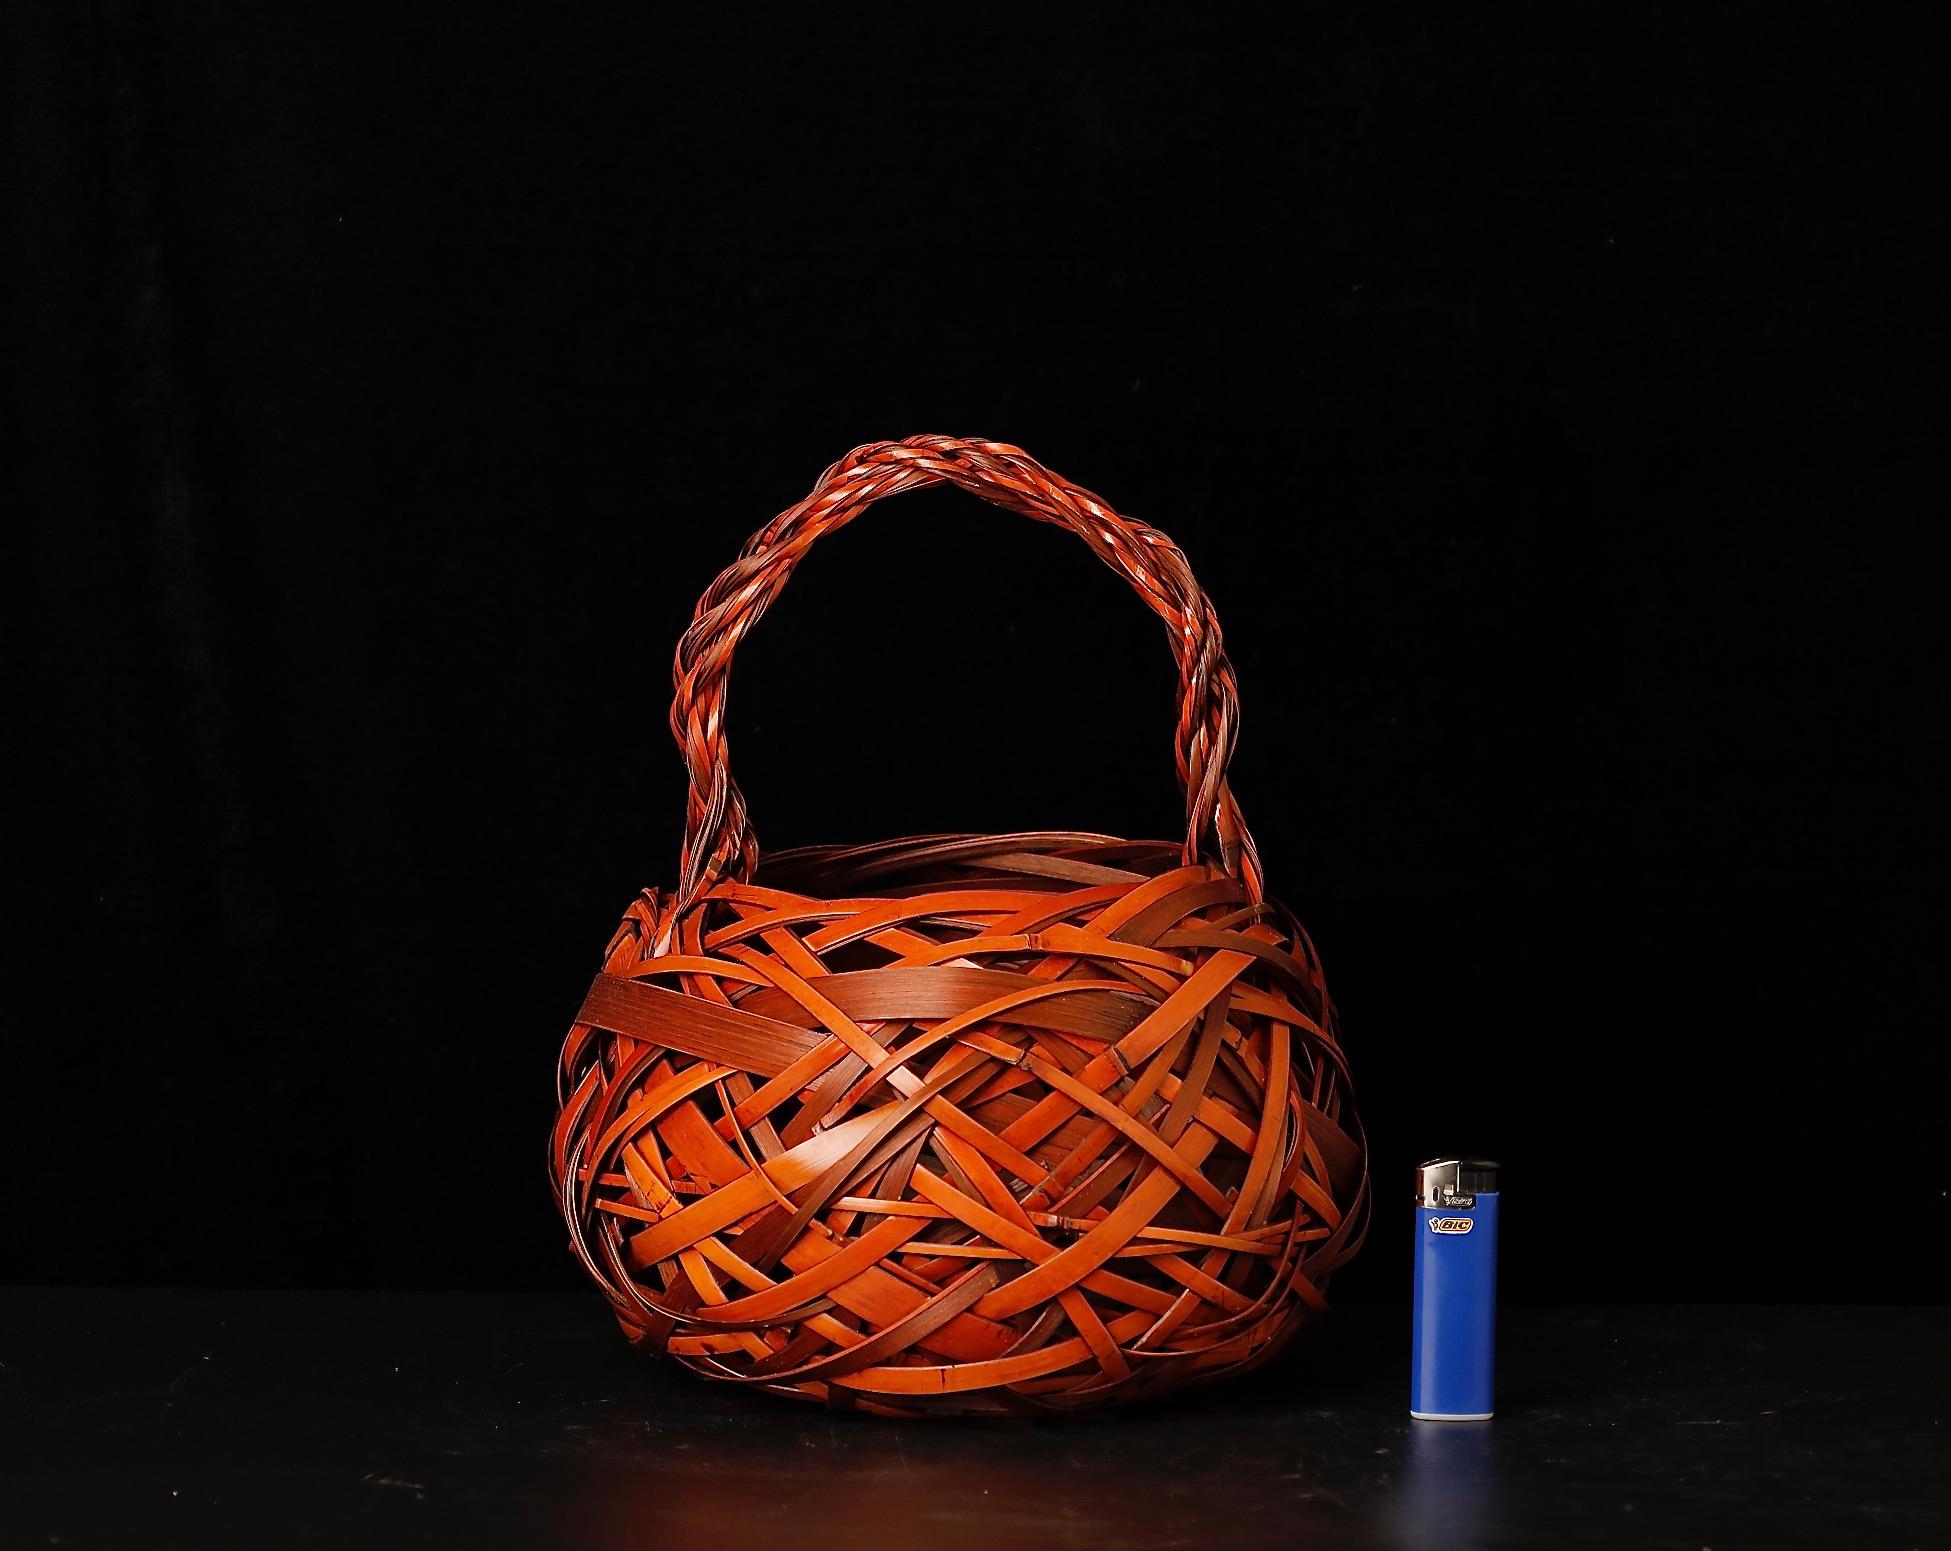 Fine Japanese Ikebana Bamboo Basket

This fine Japanese Ikebana Bamboo Basket is a beautiful and versatile piece that can be used for a variety of purposes. It is made of high-quality bamboo and is in good condition with some minor patination and